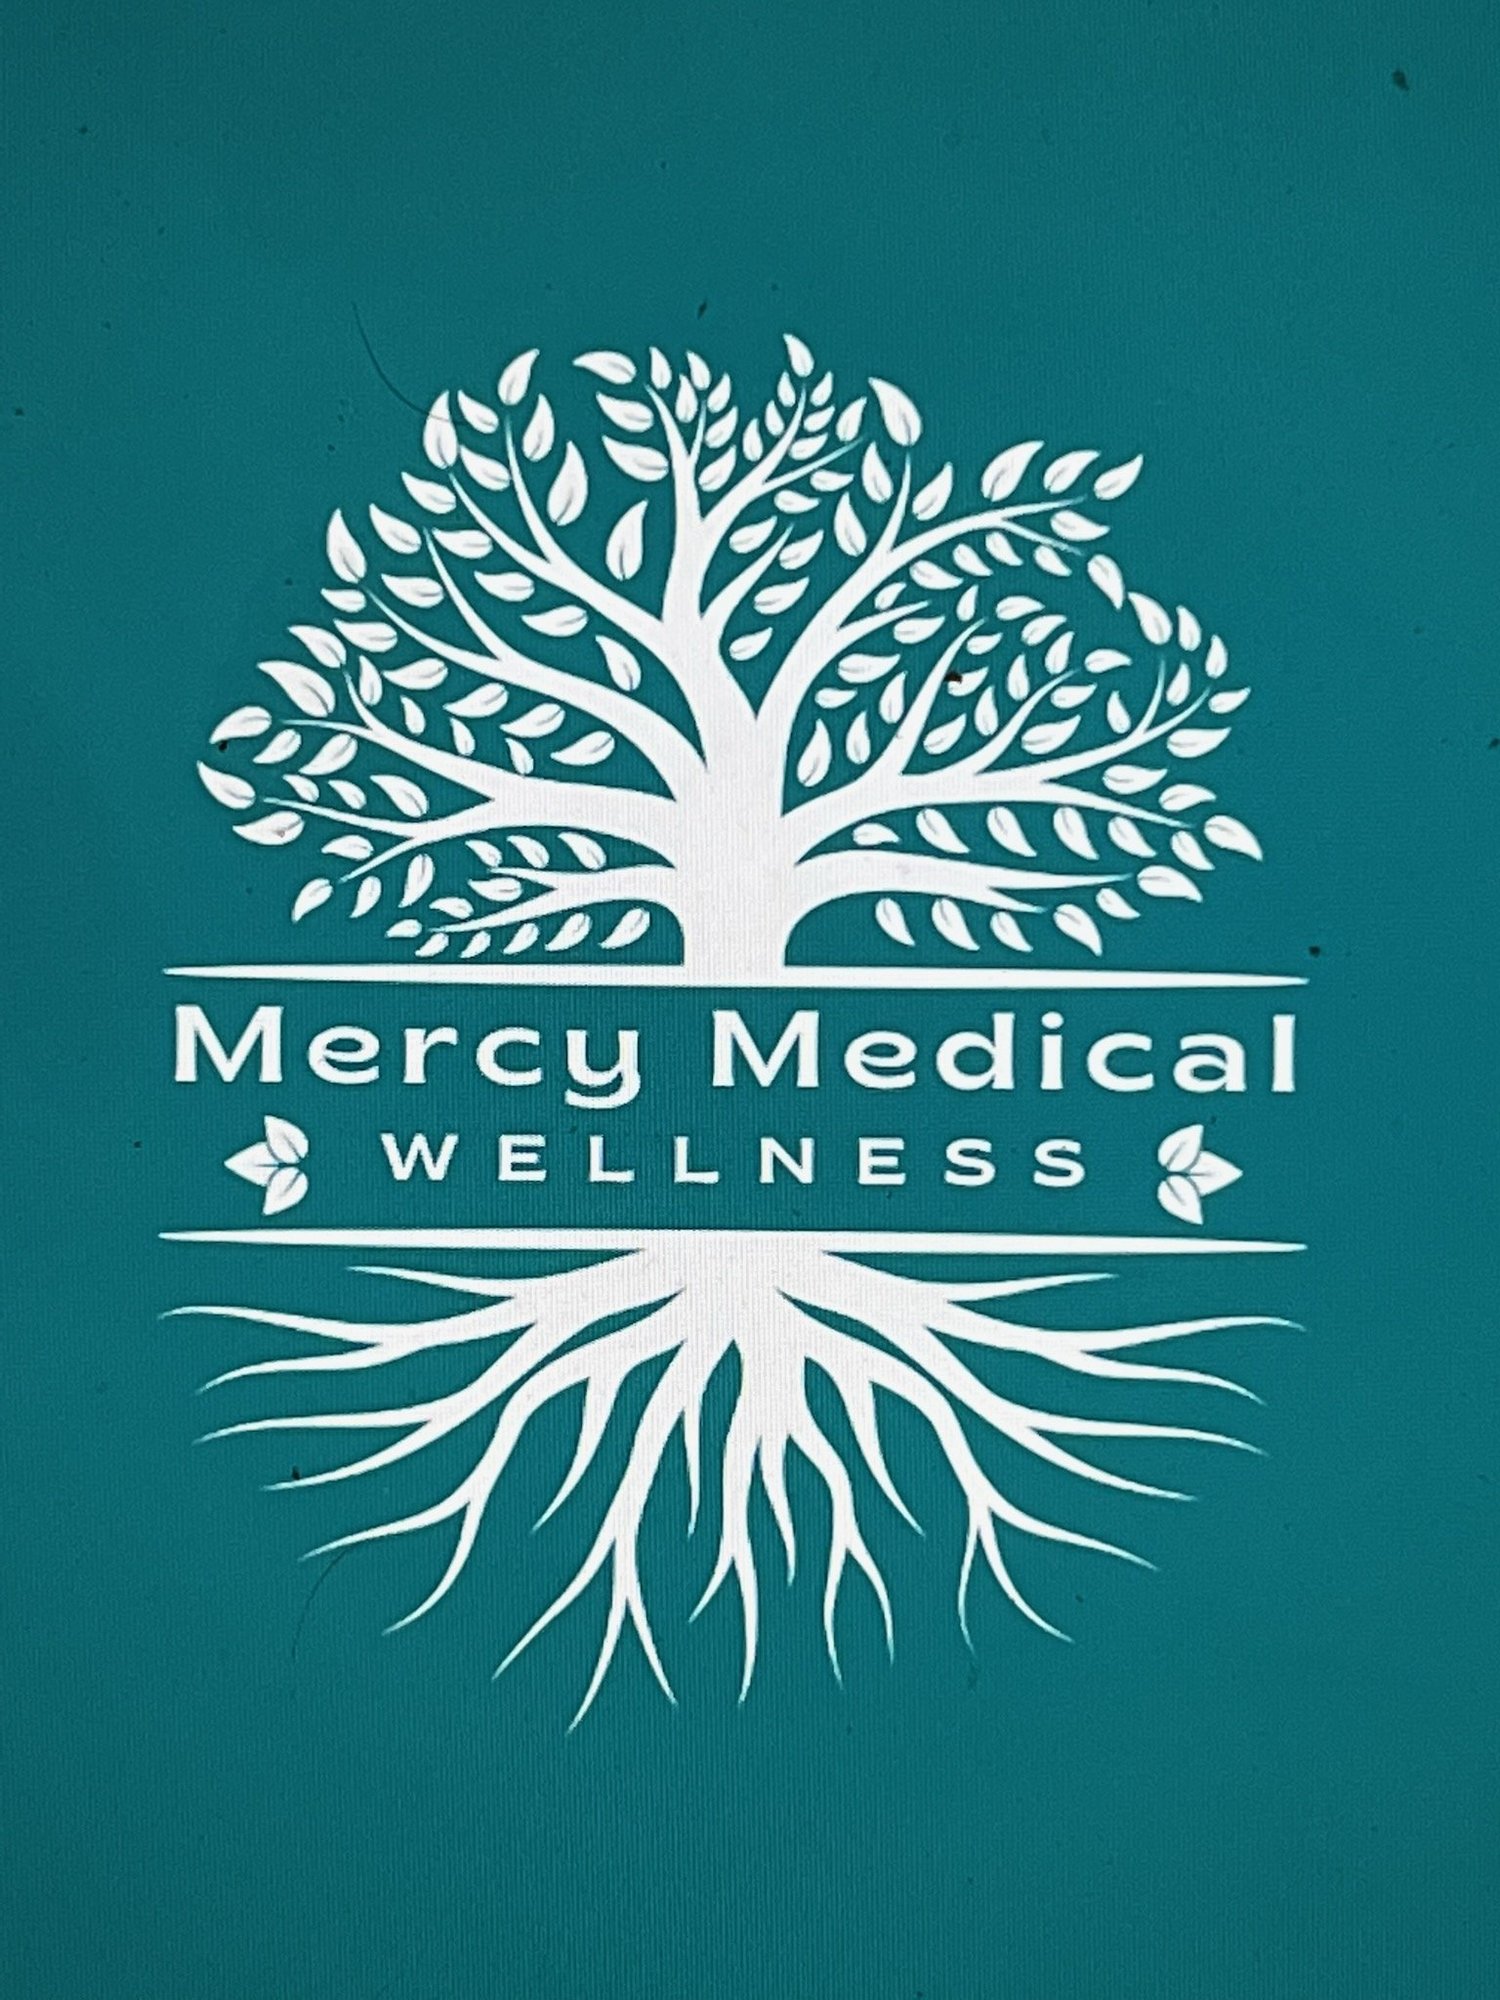 MERCY MEDICAL AND WELLNESS